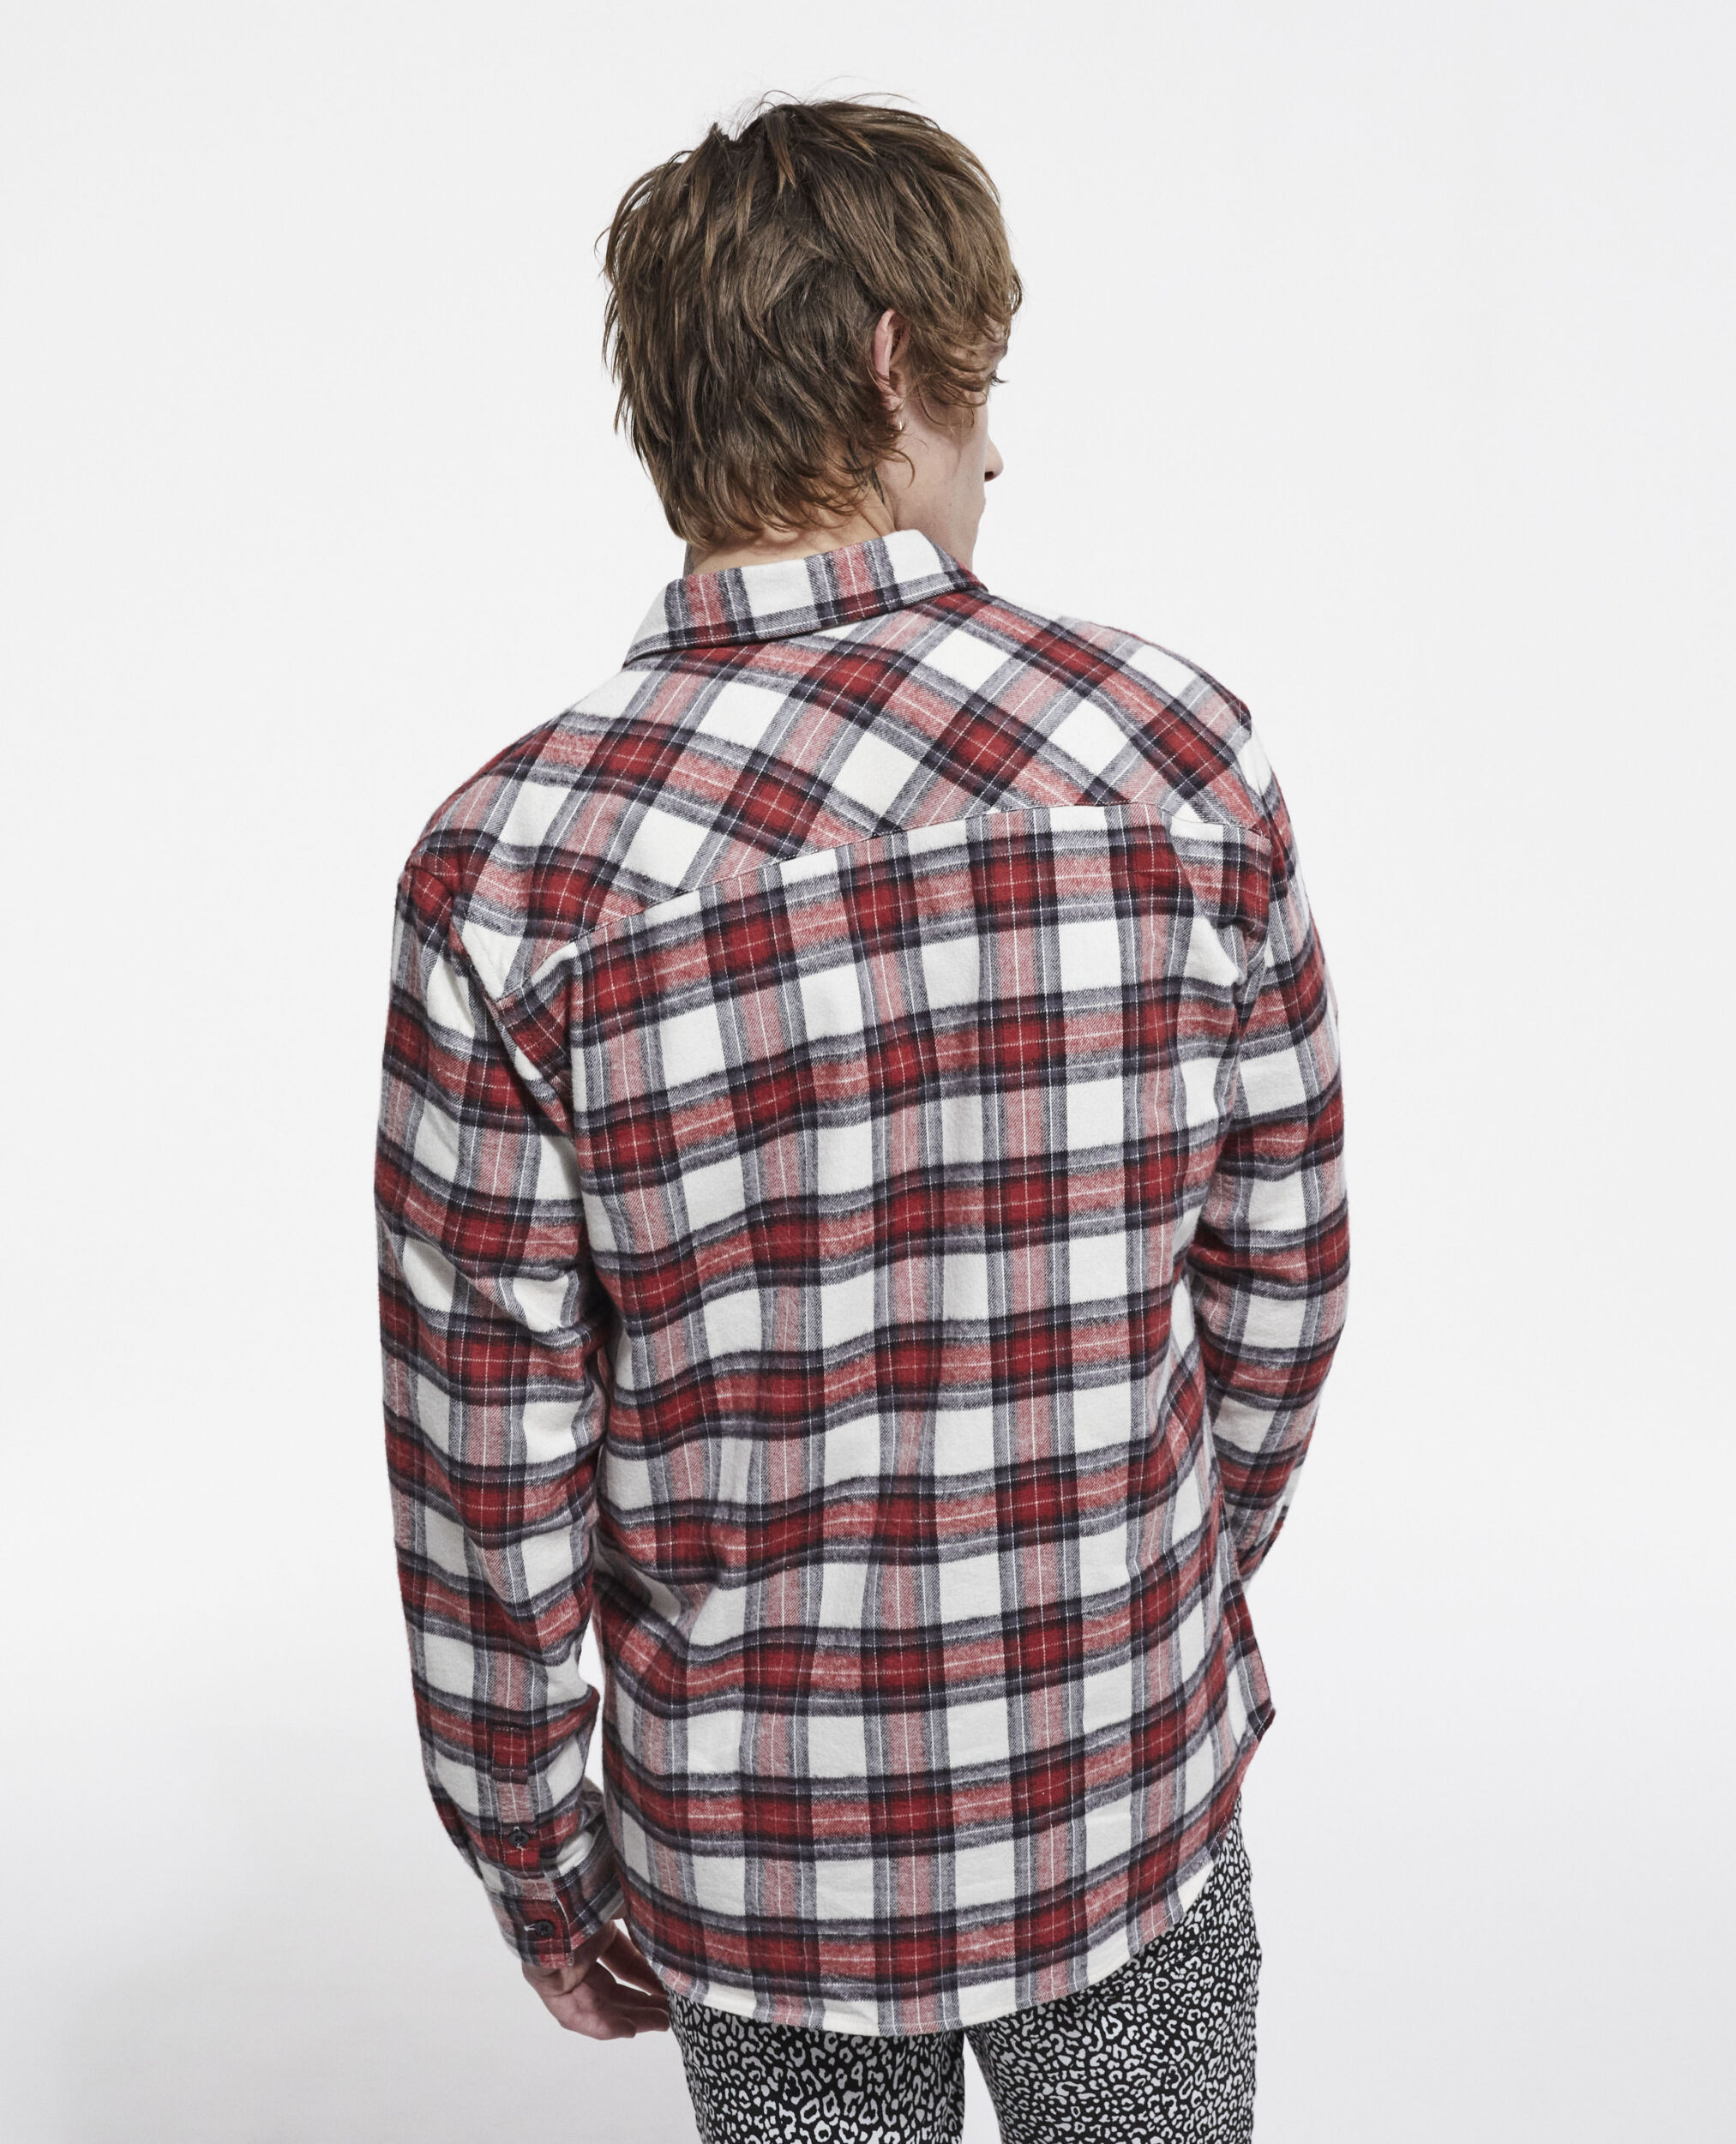 Overshirt with check motif, RED, hi-res image number null